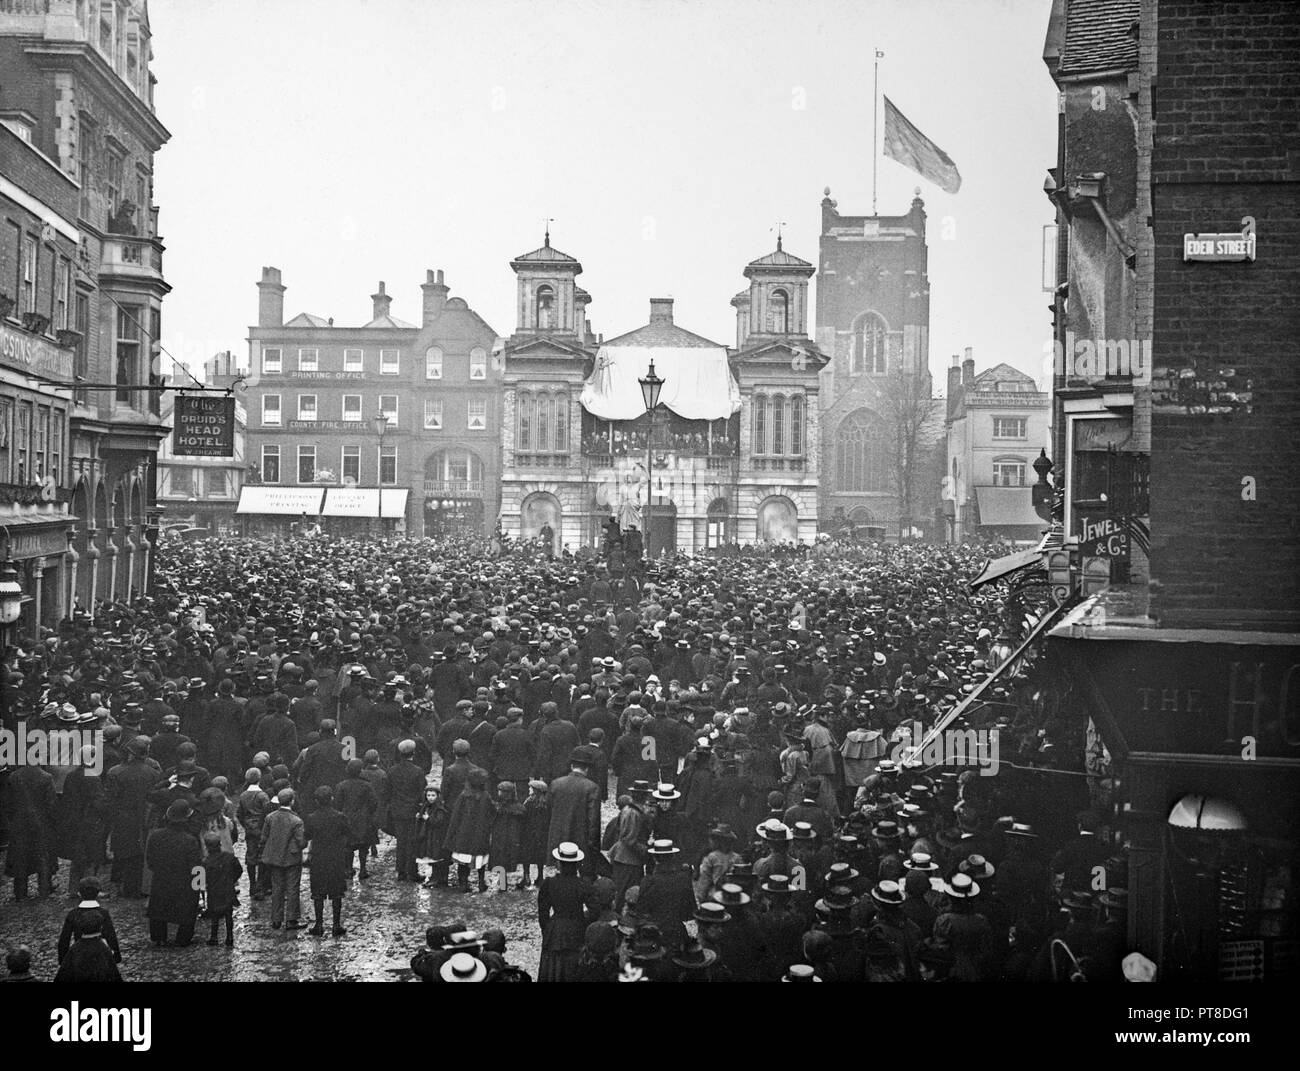 Kingston-Upon-Thames near London in 1901. Proclamation of King Edward VII in the town square before a large crowd. Stock Photo